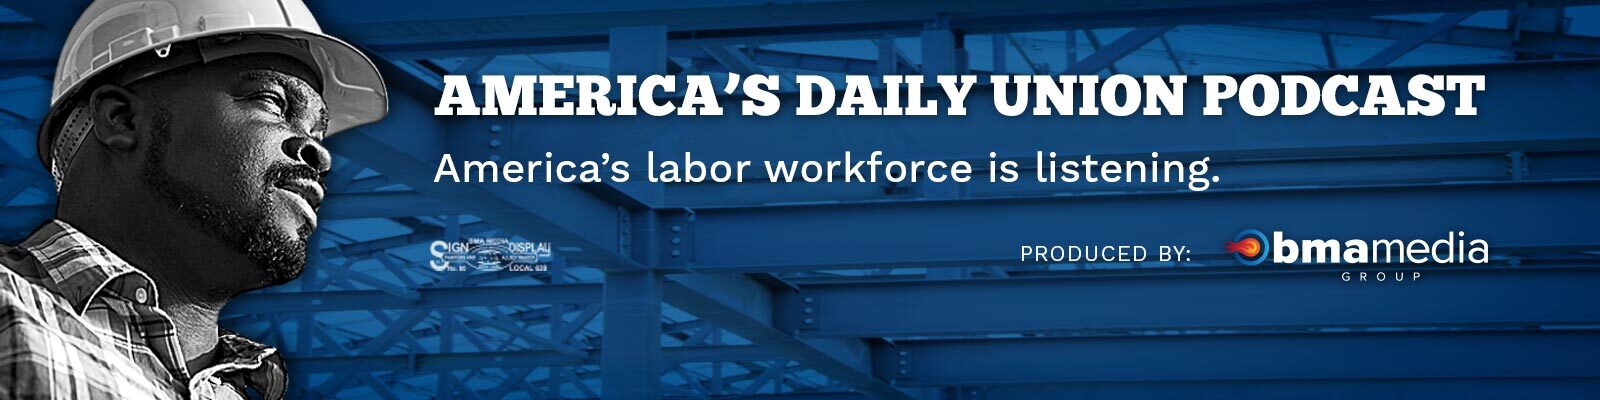 America’s Work Force Union Podcast